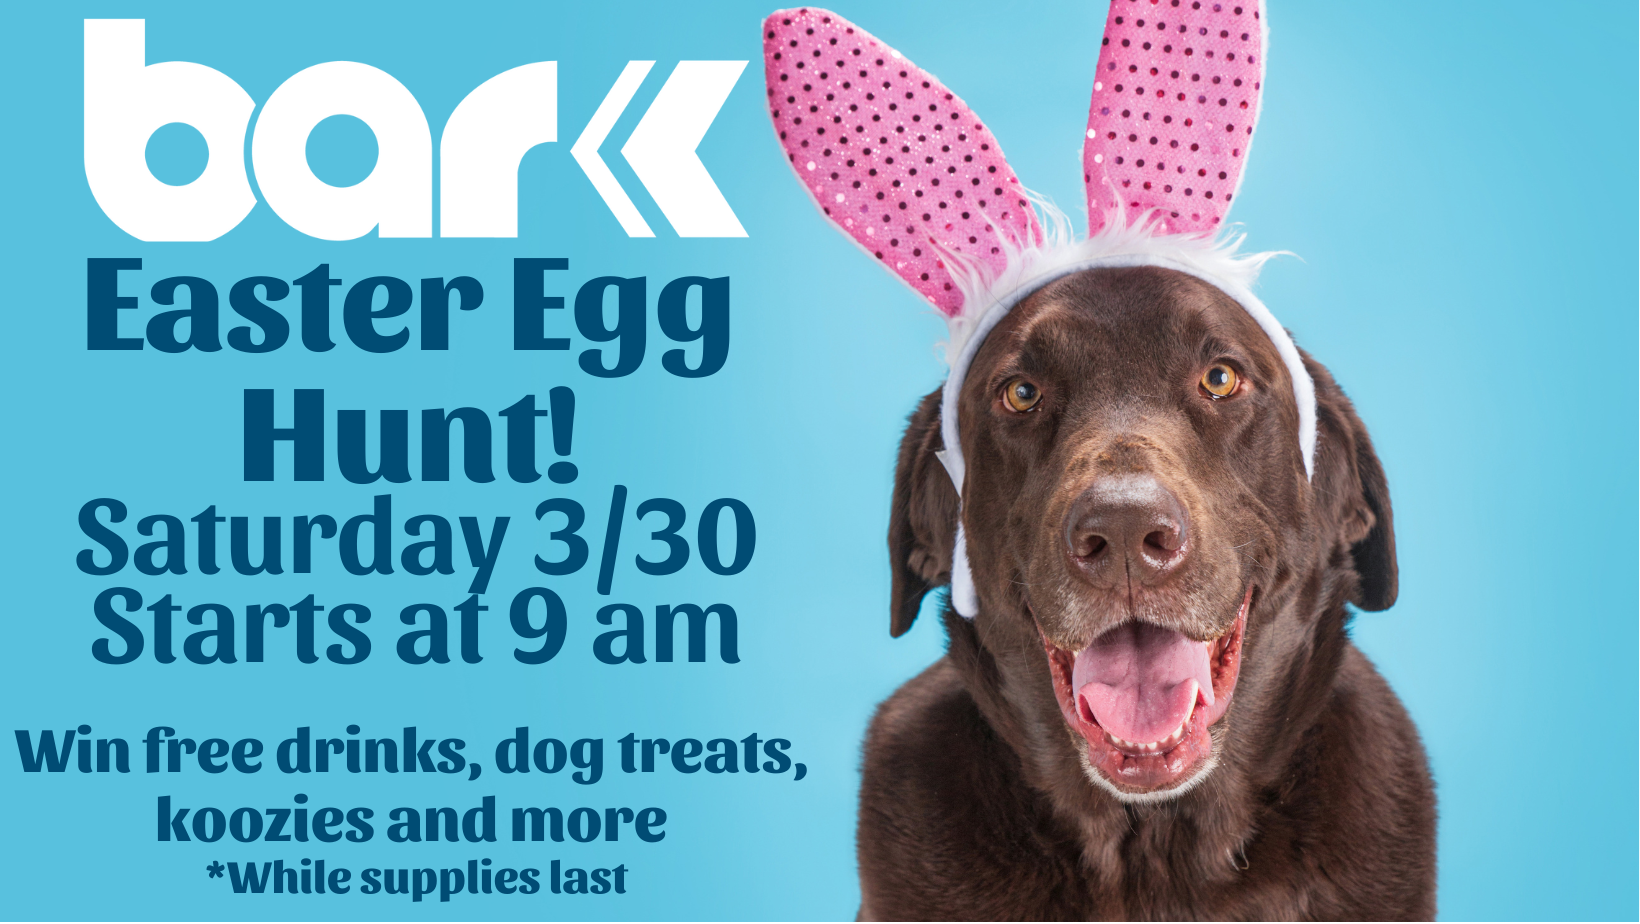 Bar K Easter Egg Hunt! Saturday March 30th at 9 am. Win free drinks, dog treats, koozies, and more. while supplies last.